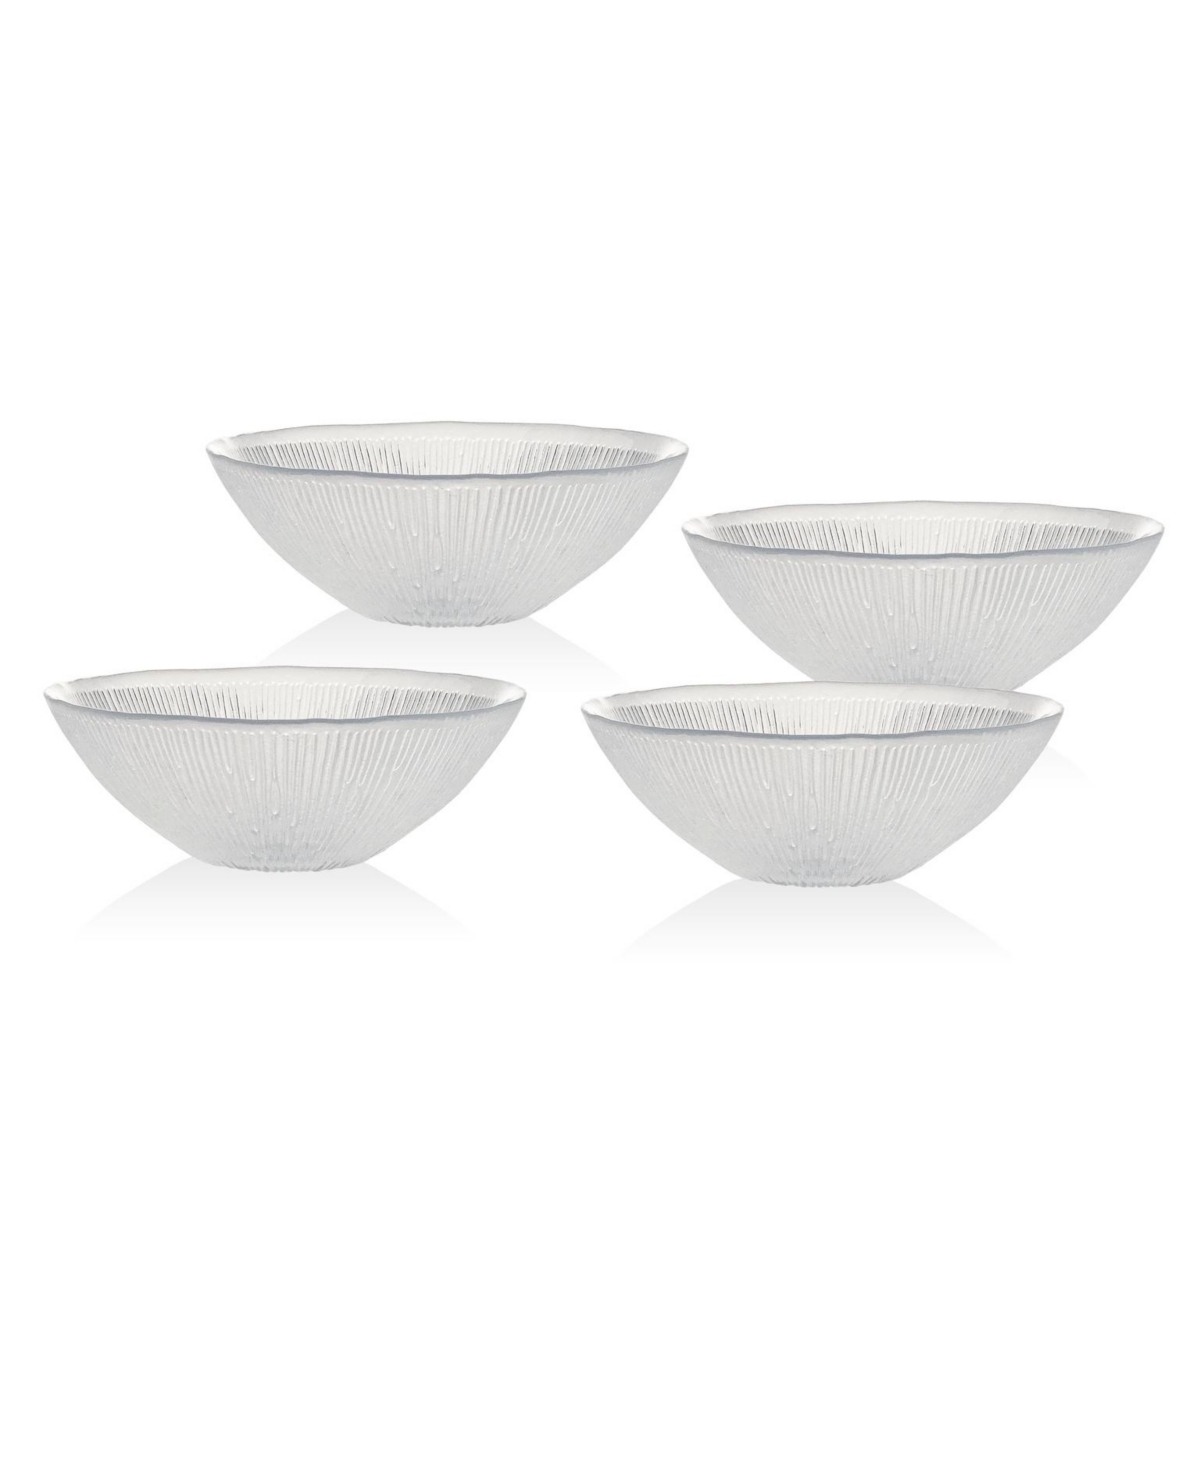 Crystal Bowls Set of 4 with Swirl Design - Clear